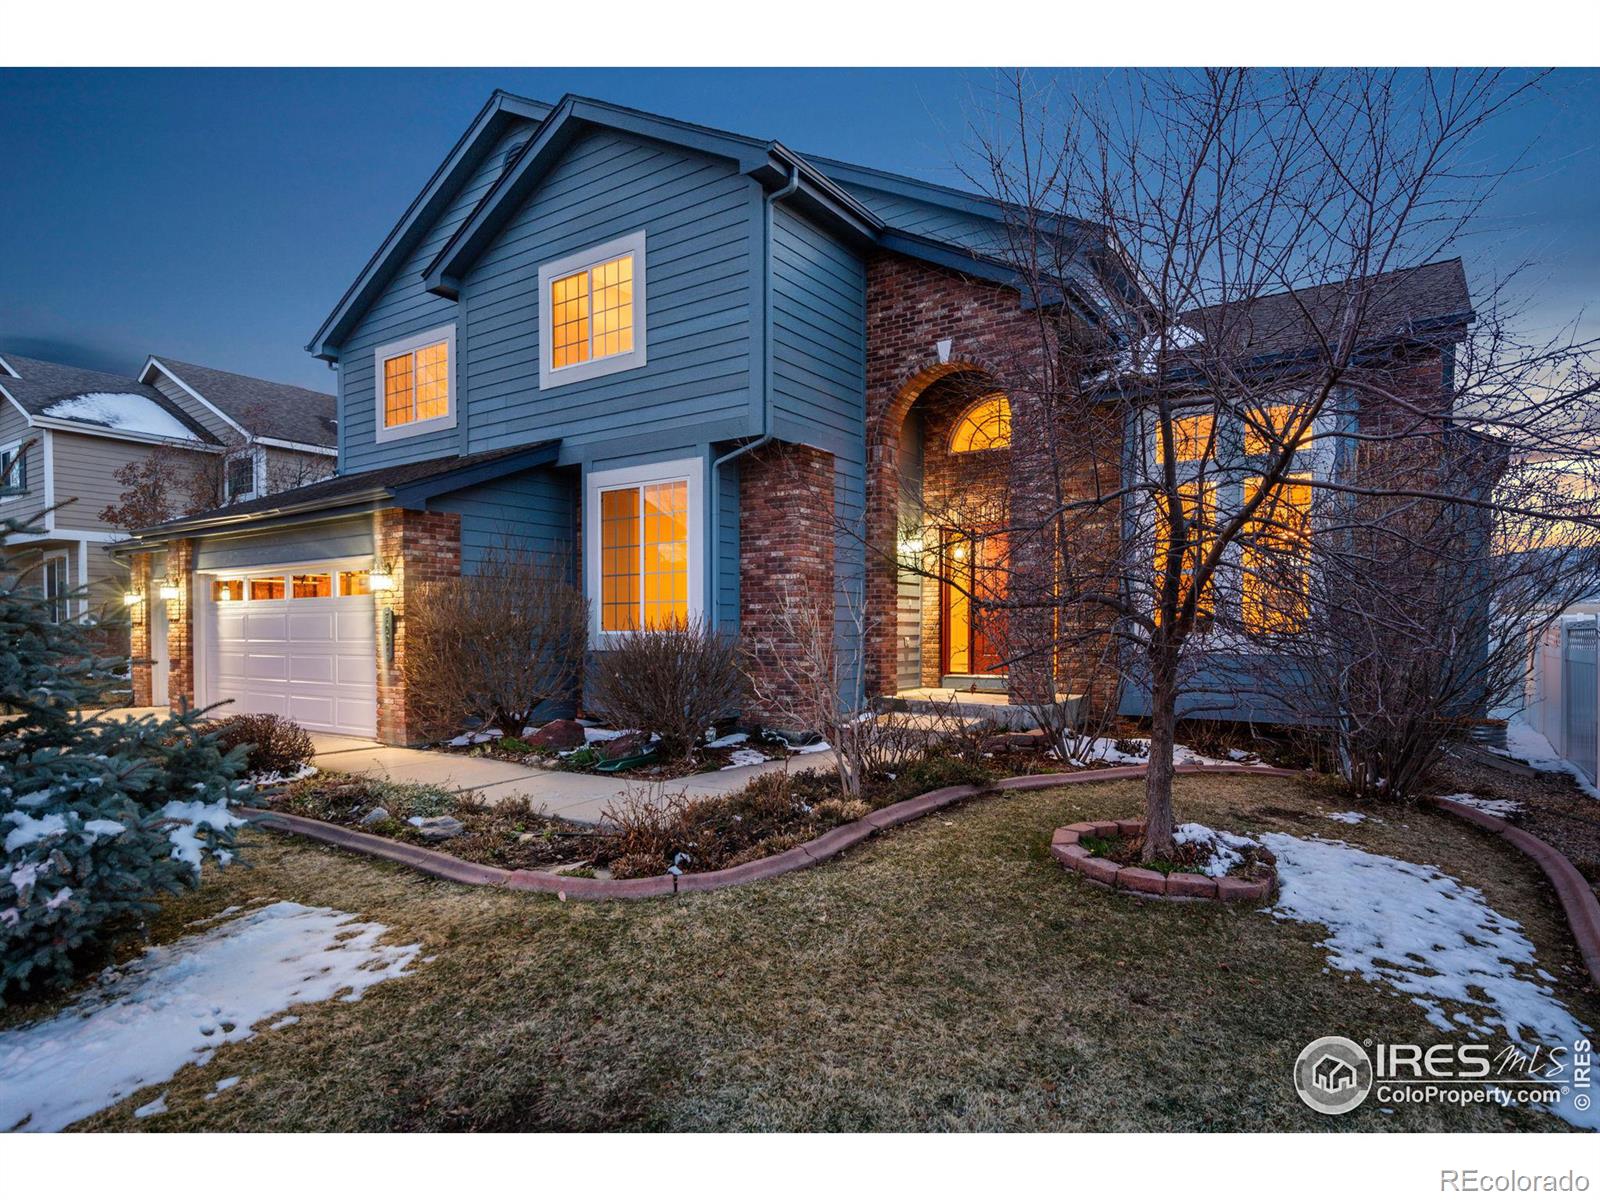 Report Image for 7027  Ranger Drive,Fort Collins, Colorado